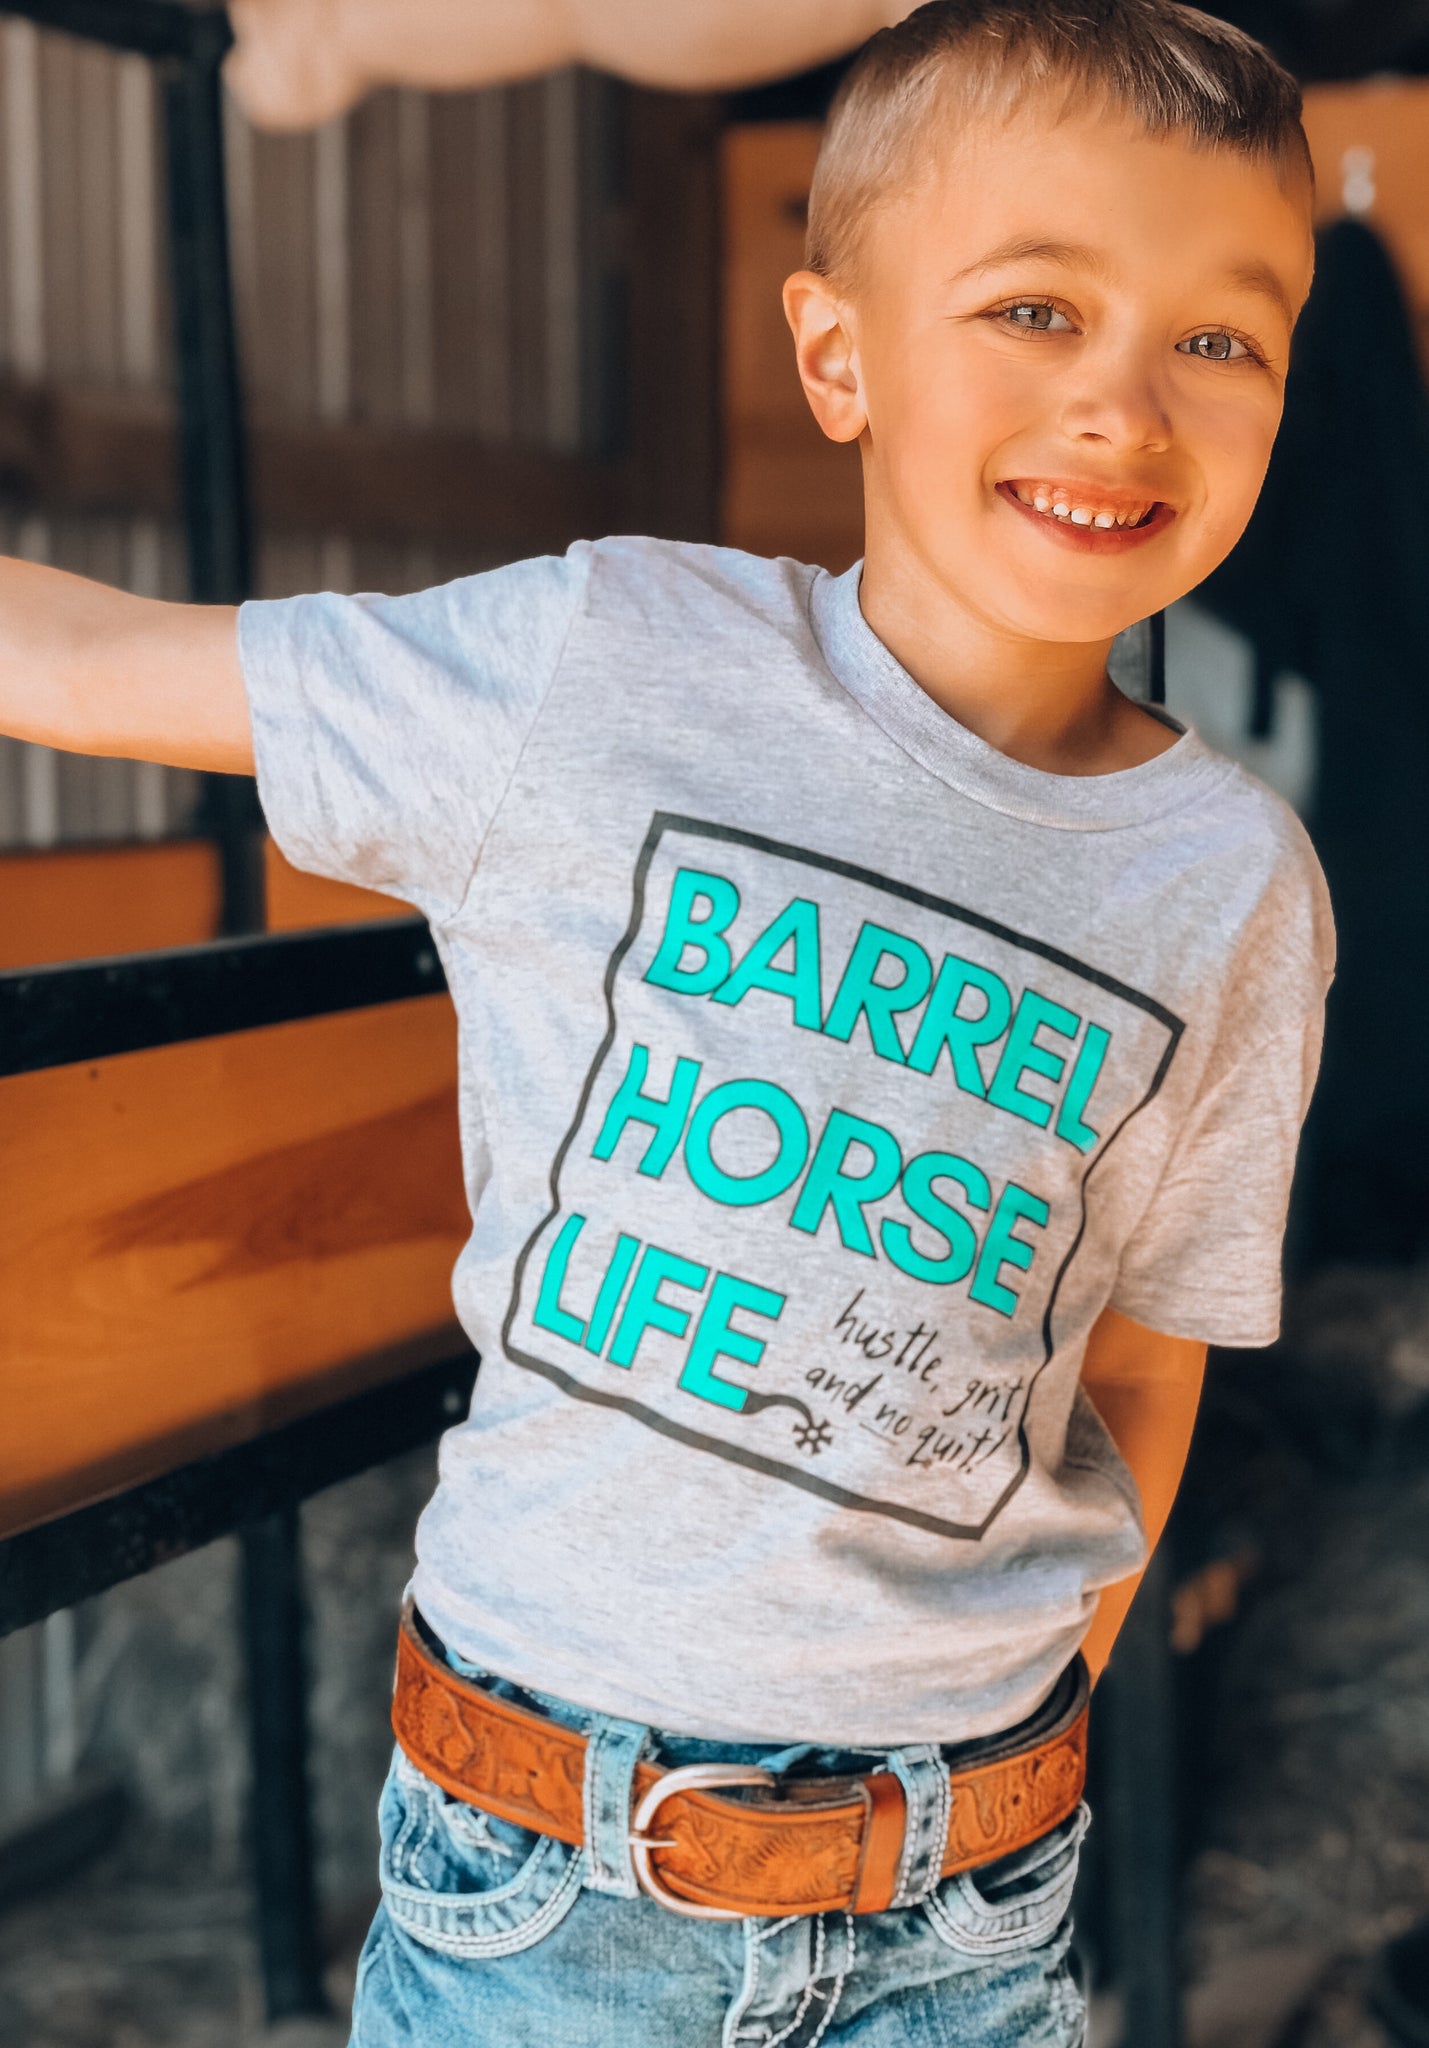 The Barrel Horse Life, Youth T-Shirt